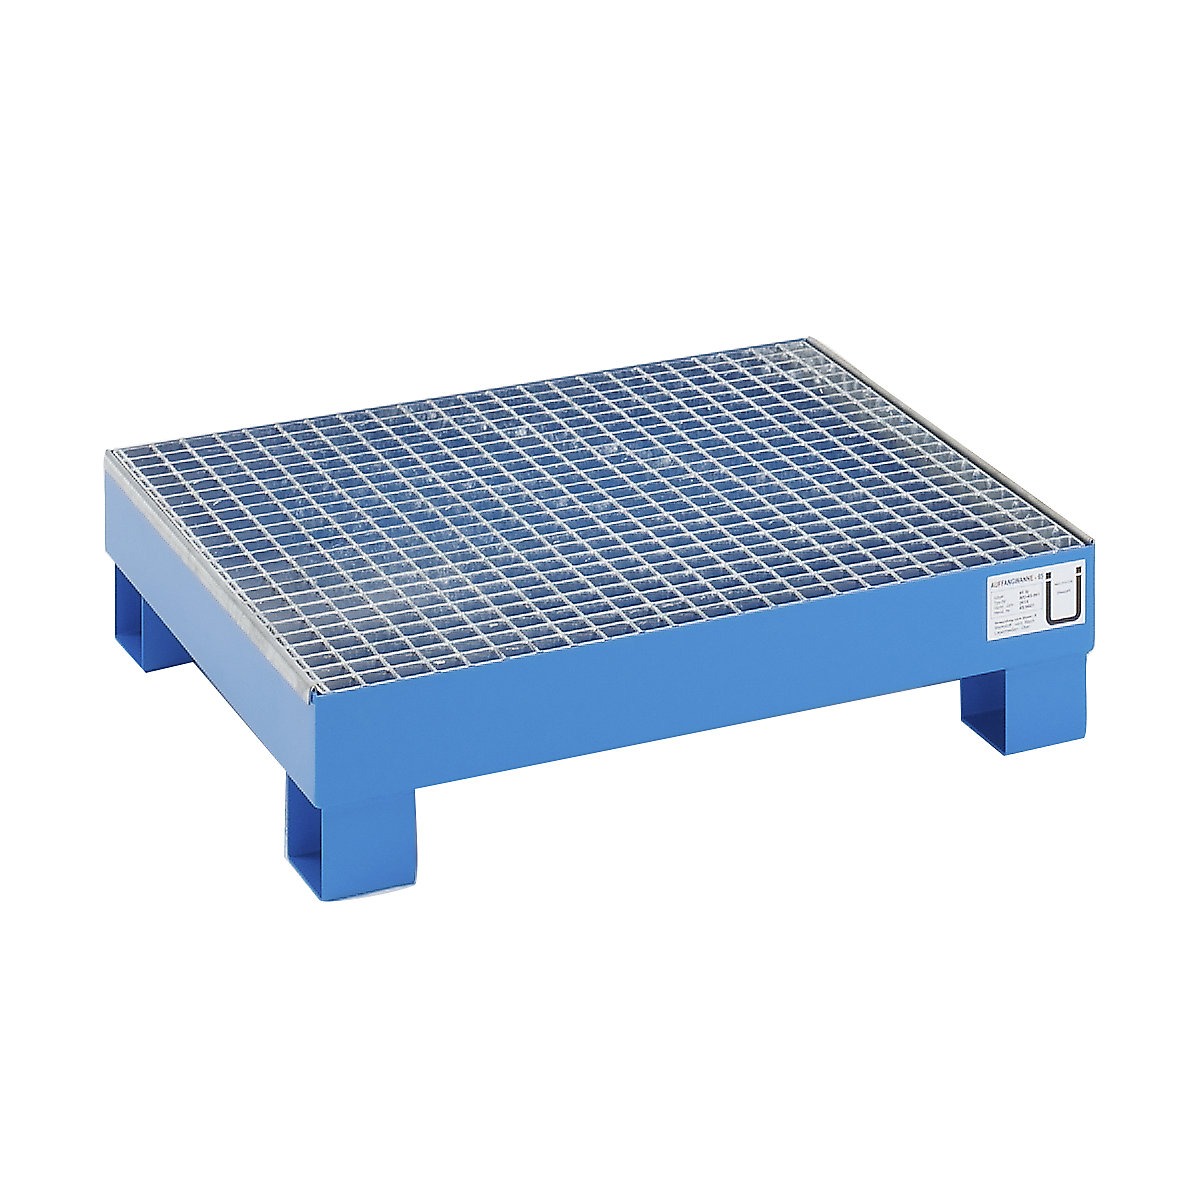 Sump tray for 60 l – eurokraft basic, LxWxH 800 x 900 x 220 mm, with certification, powder coated blue, with grate-4